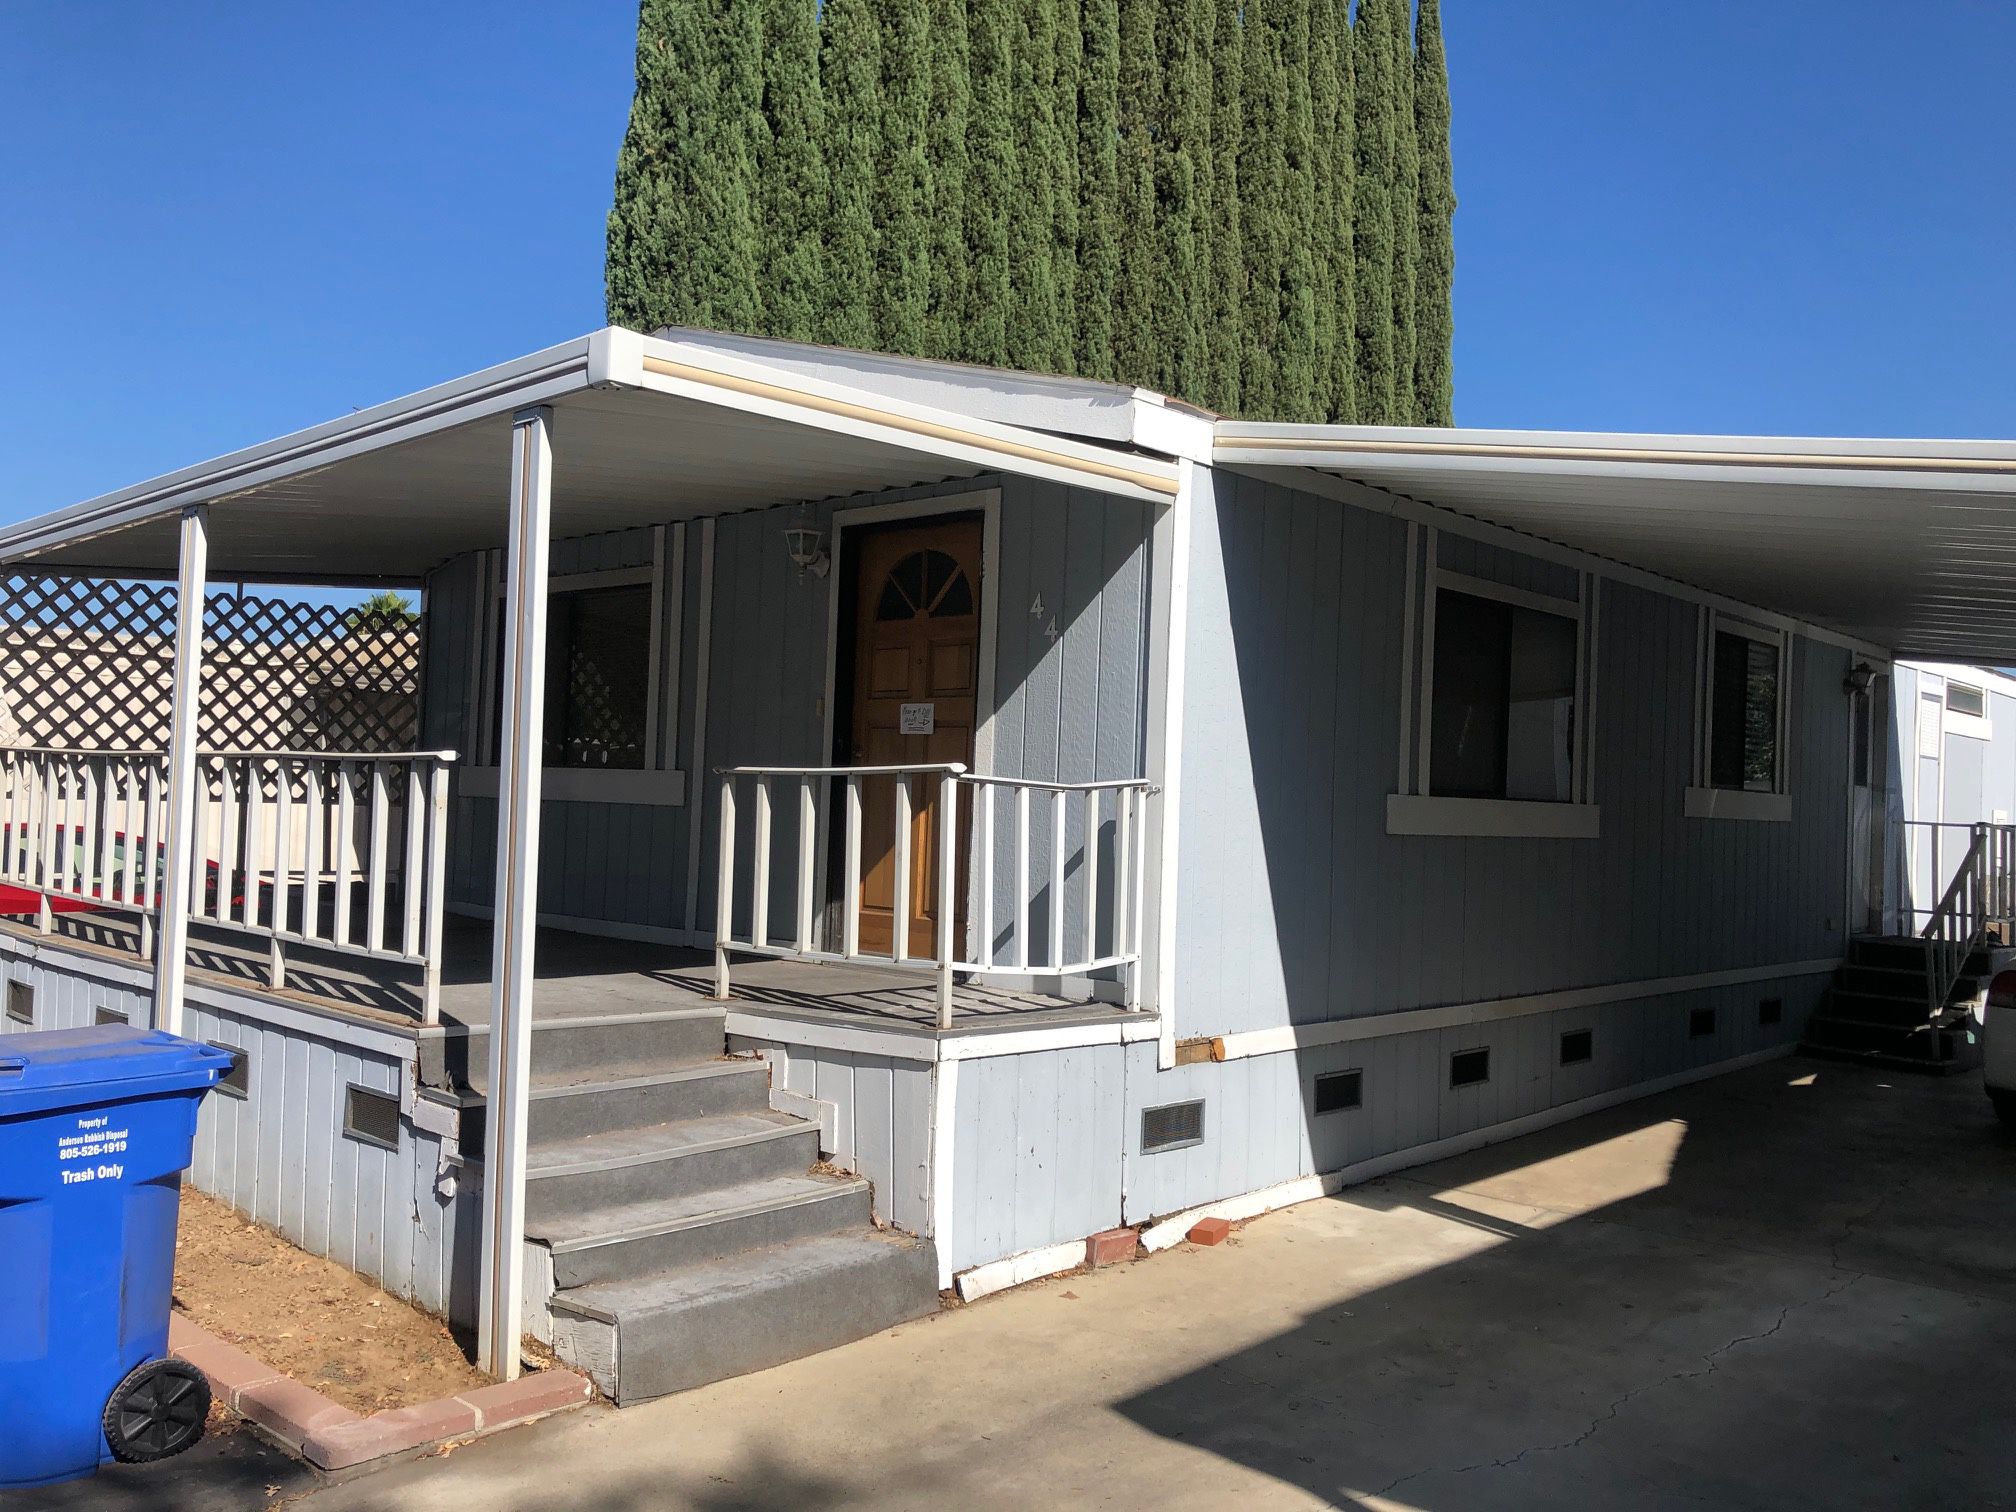 Mobile home for sale 1985 20 x52 two bedroom two bath ready to go for extra cost